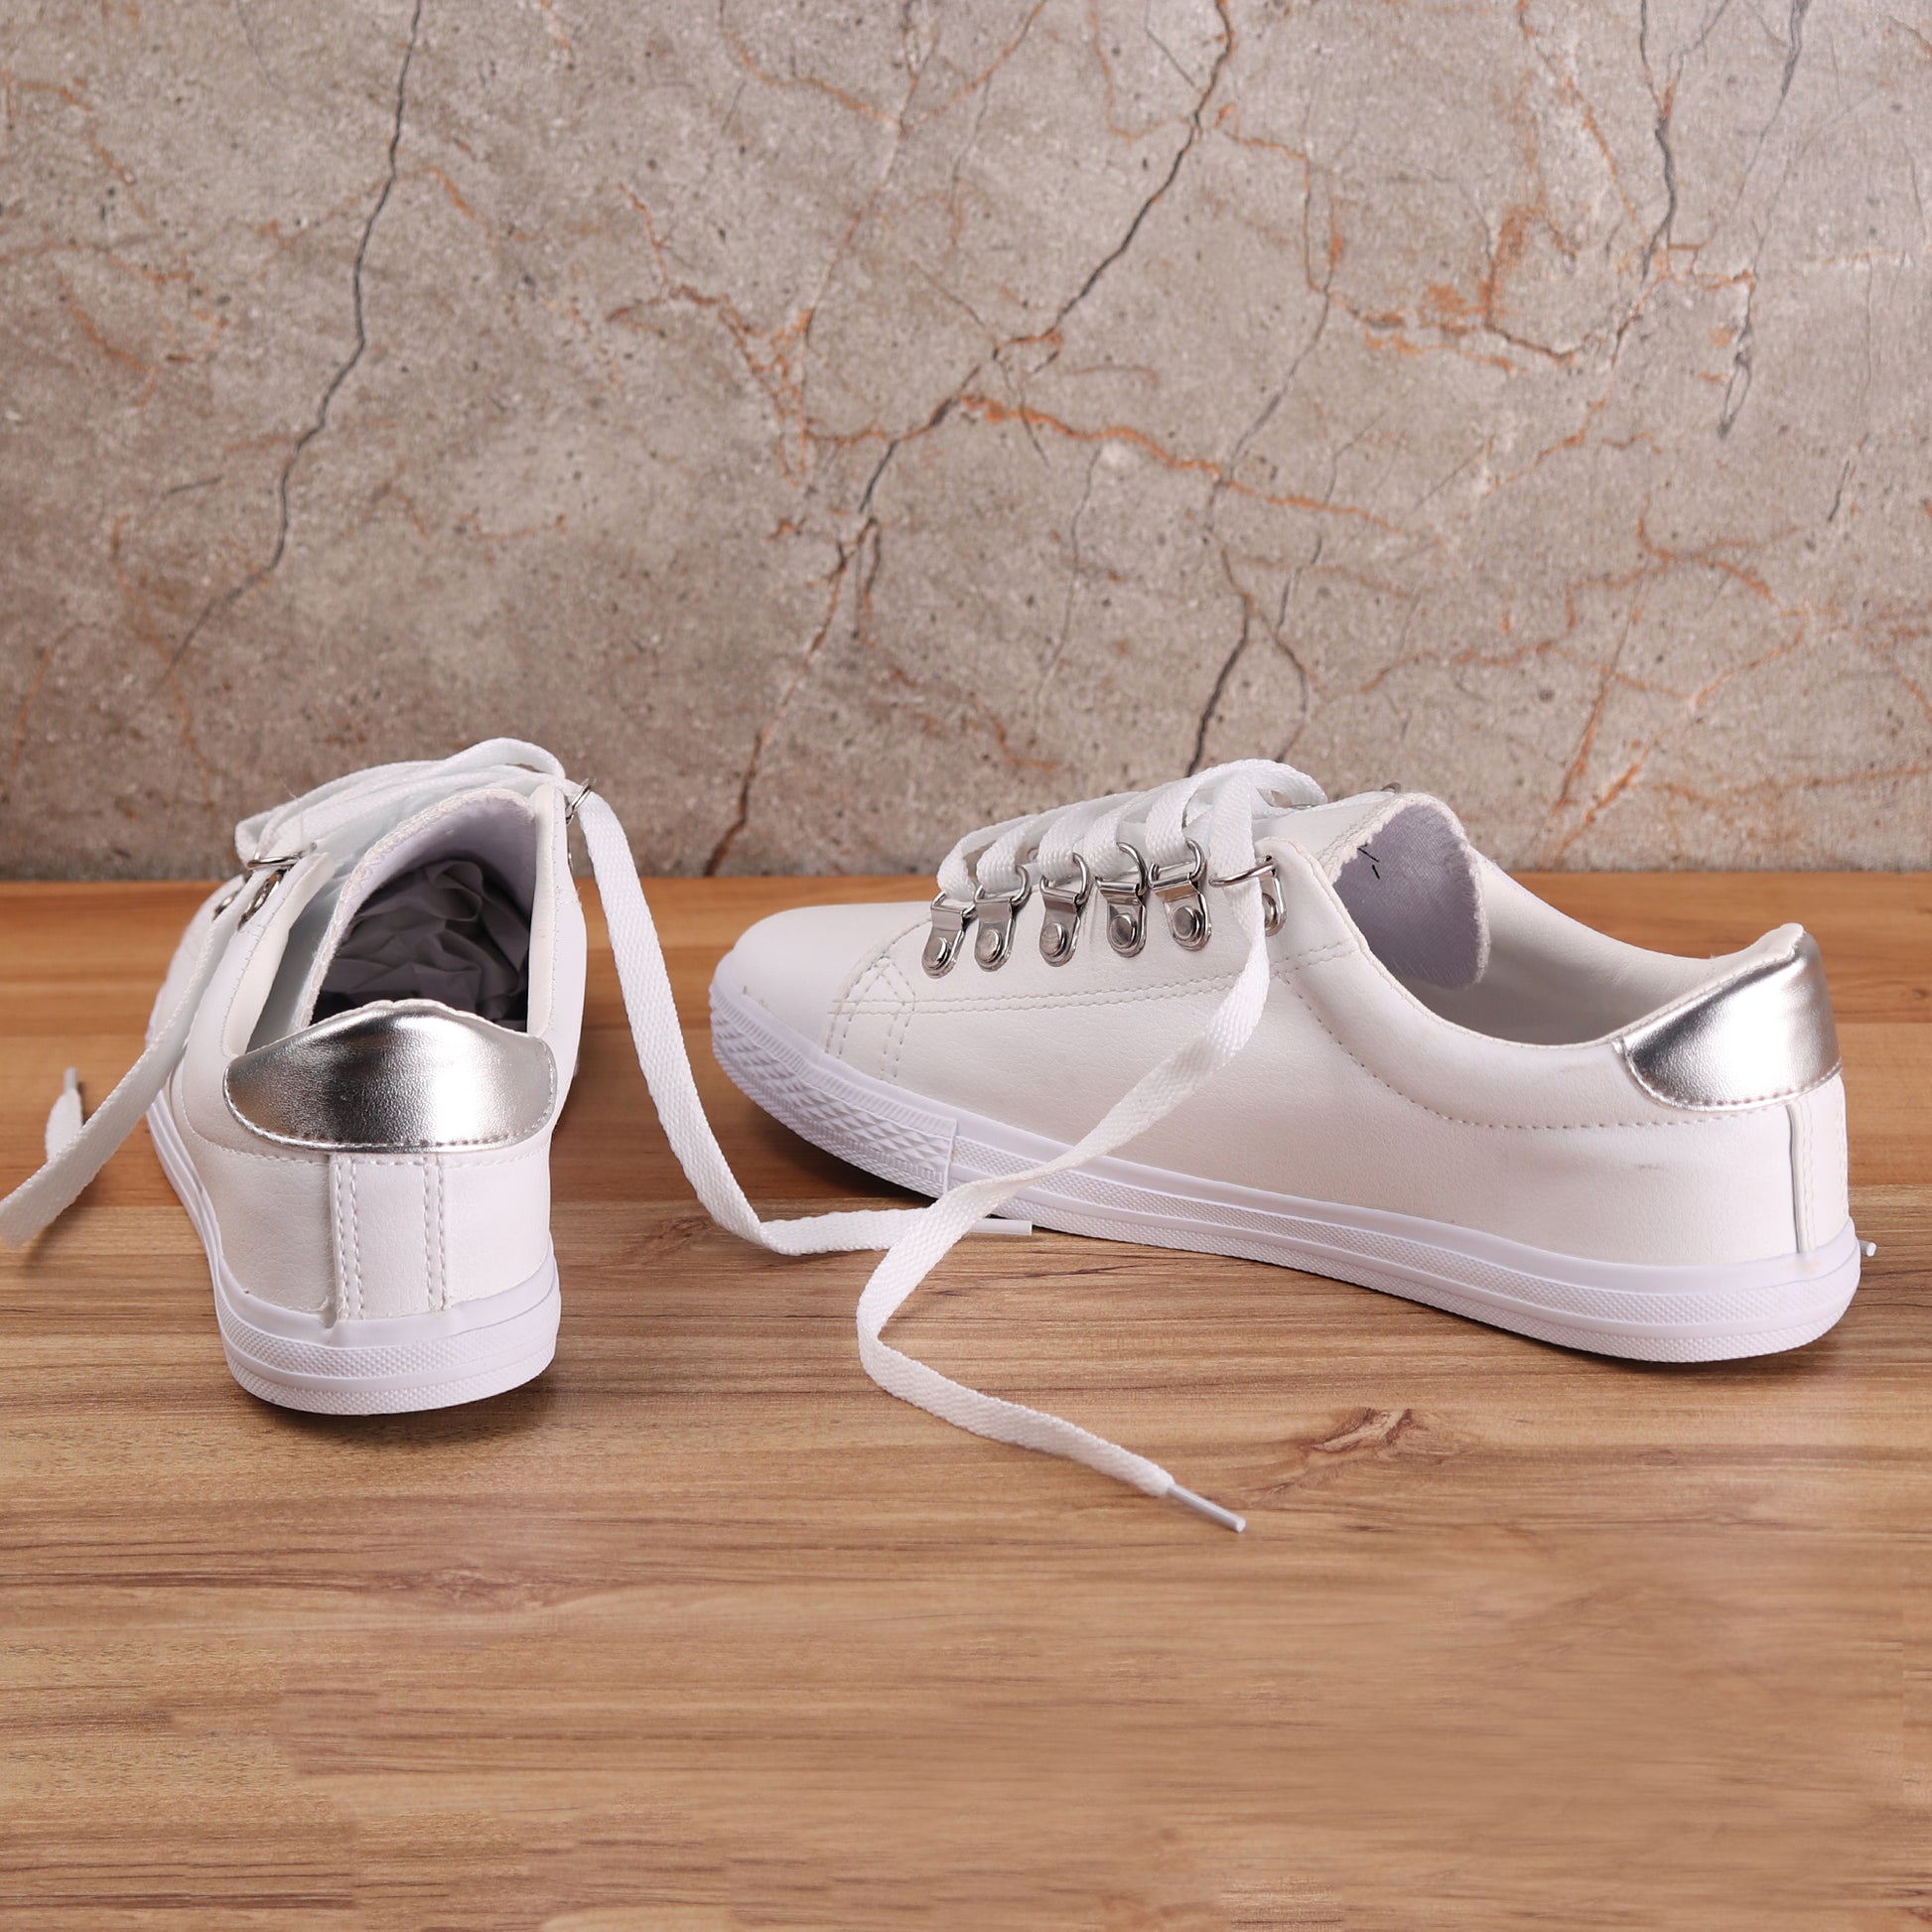 Foot Wear,White Sneaker with Silver Accents - Cippele Multi Store